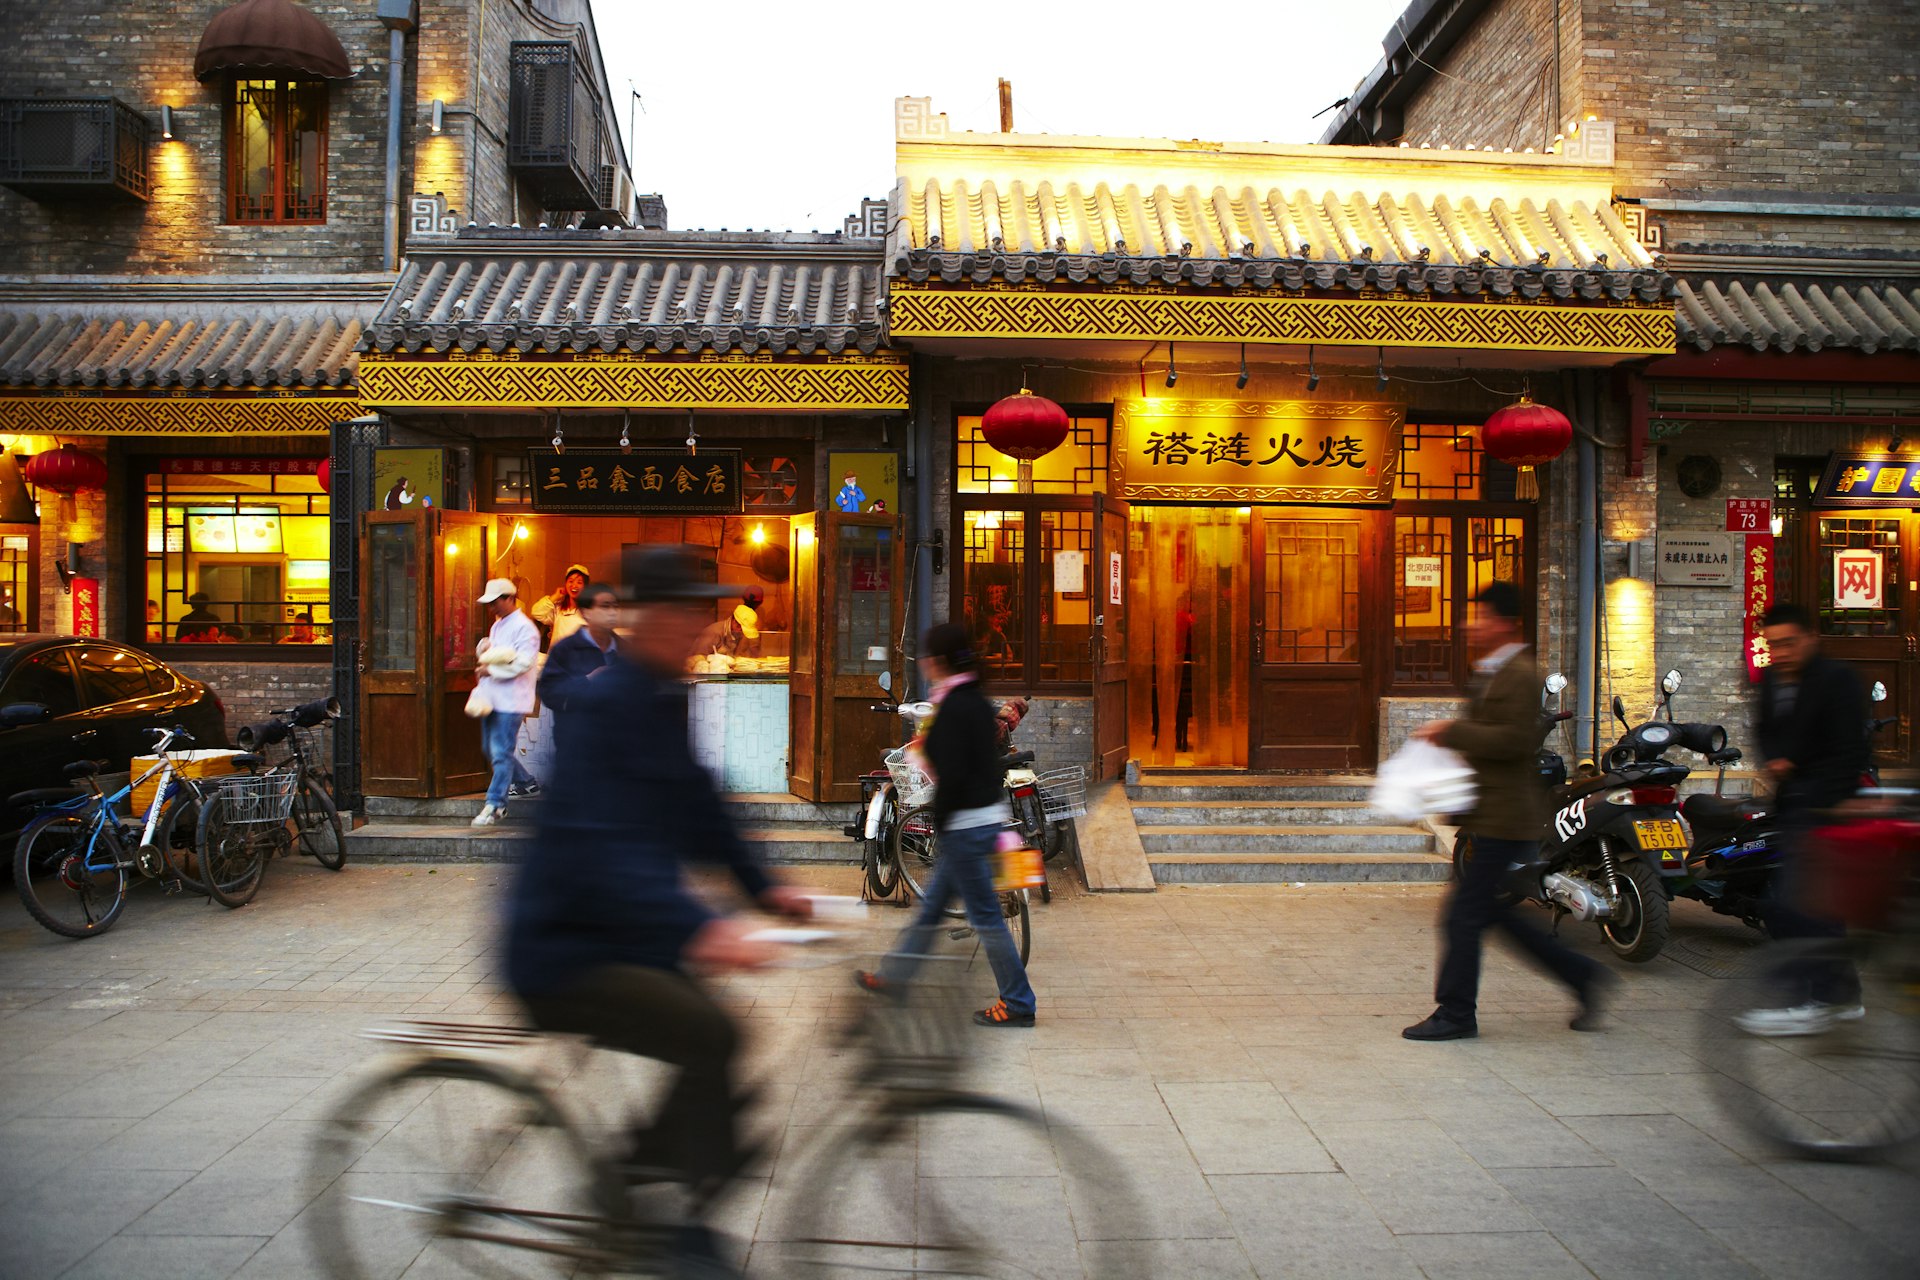 Imperial shopfronts in a traditional hutong district, Beijing, China